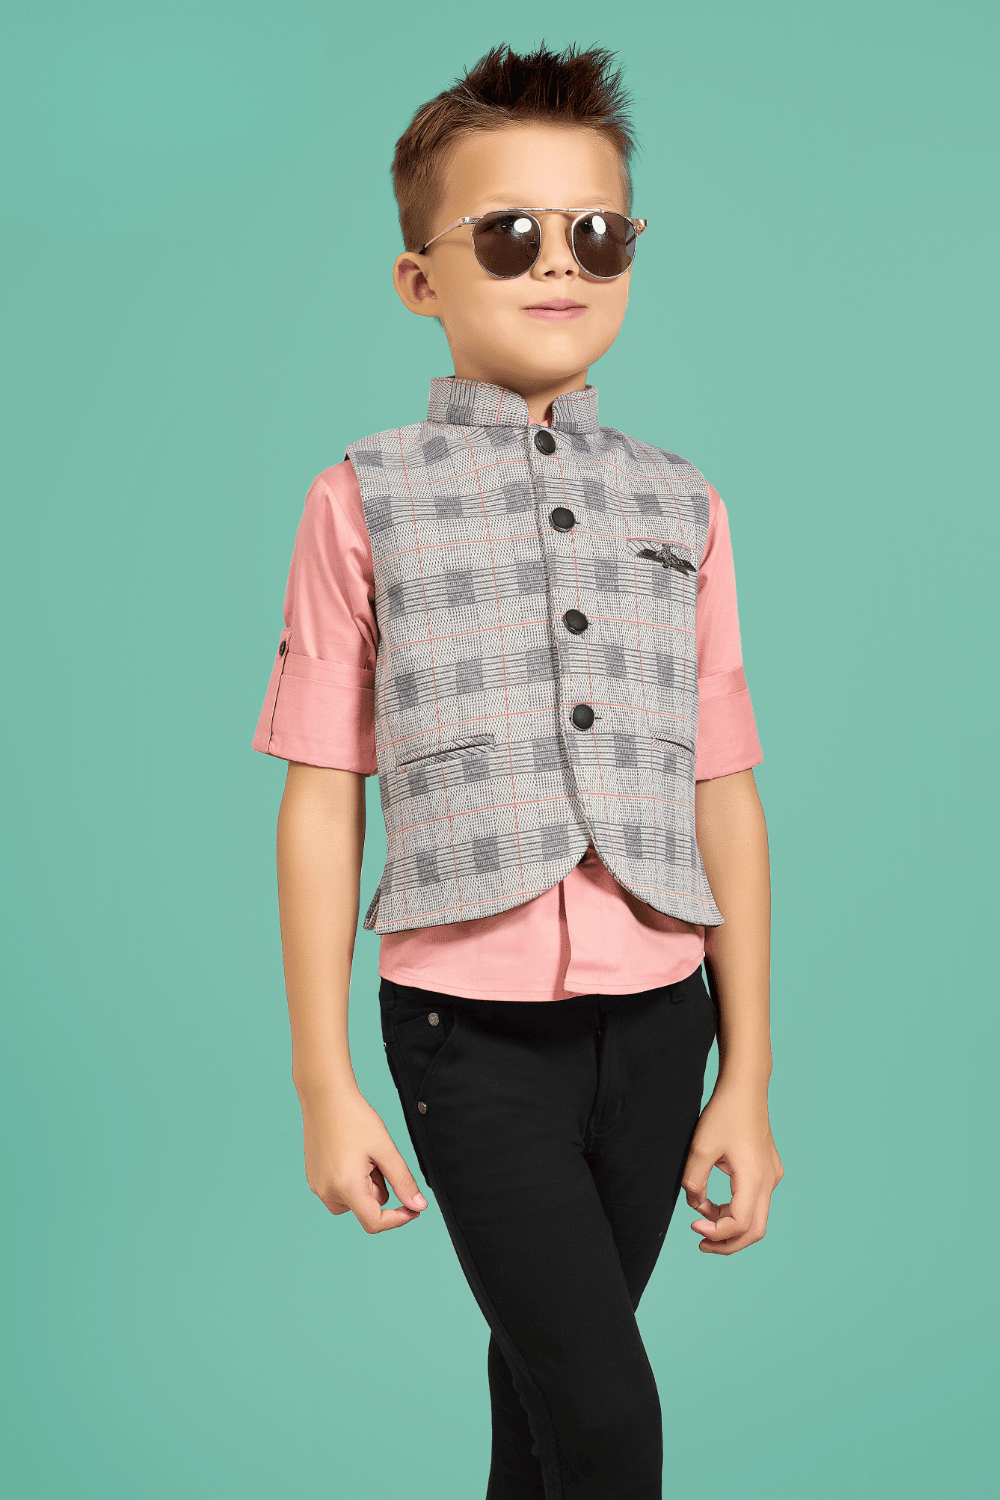 Peach and Grey Printed Waist Coat and Black Pant Set for Boys with Belt - Seasons Chennai